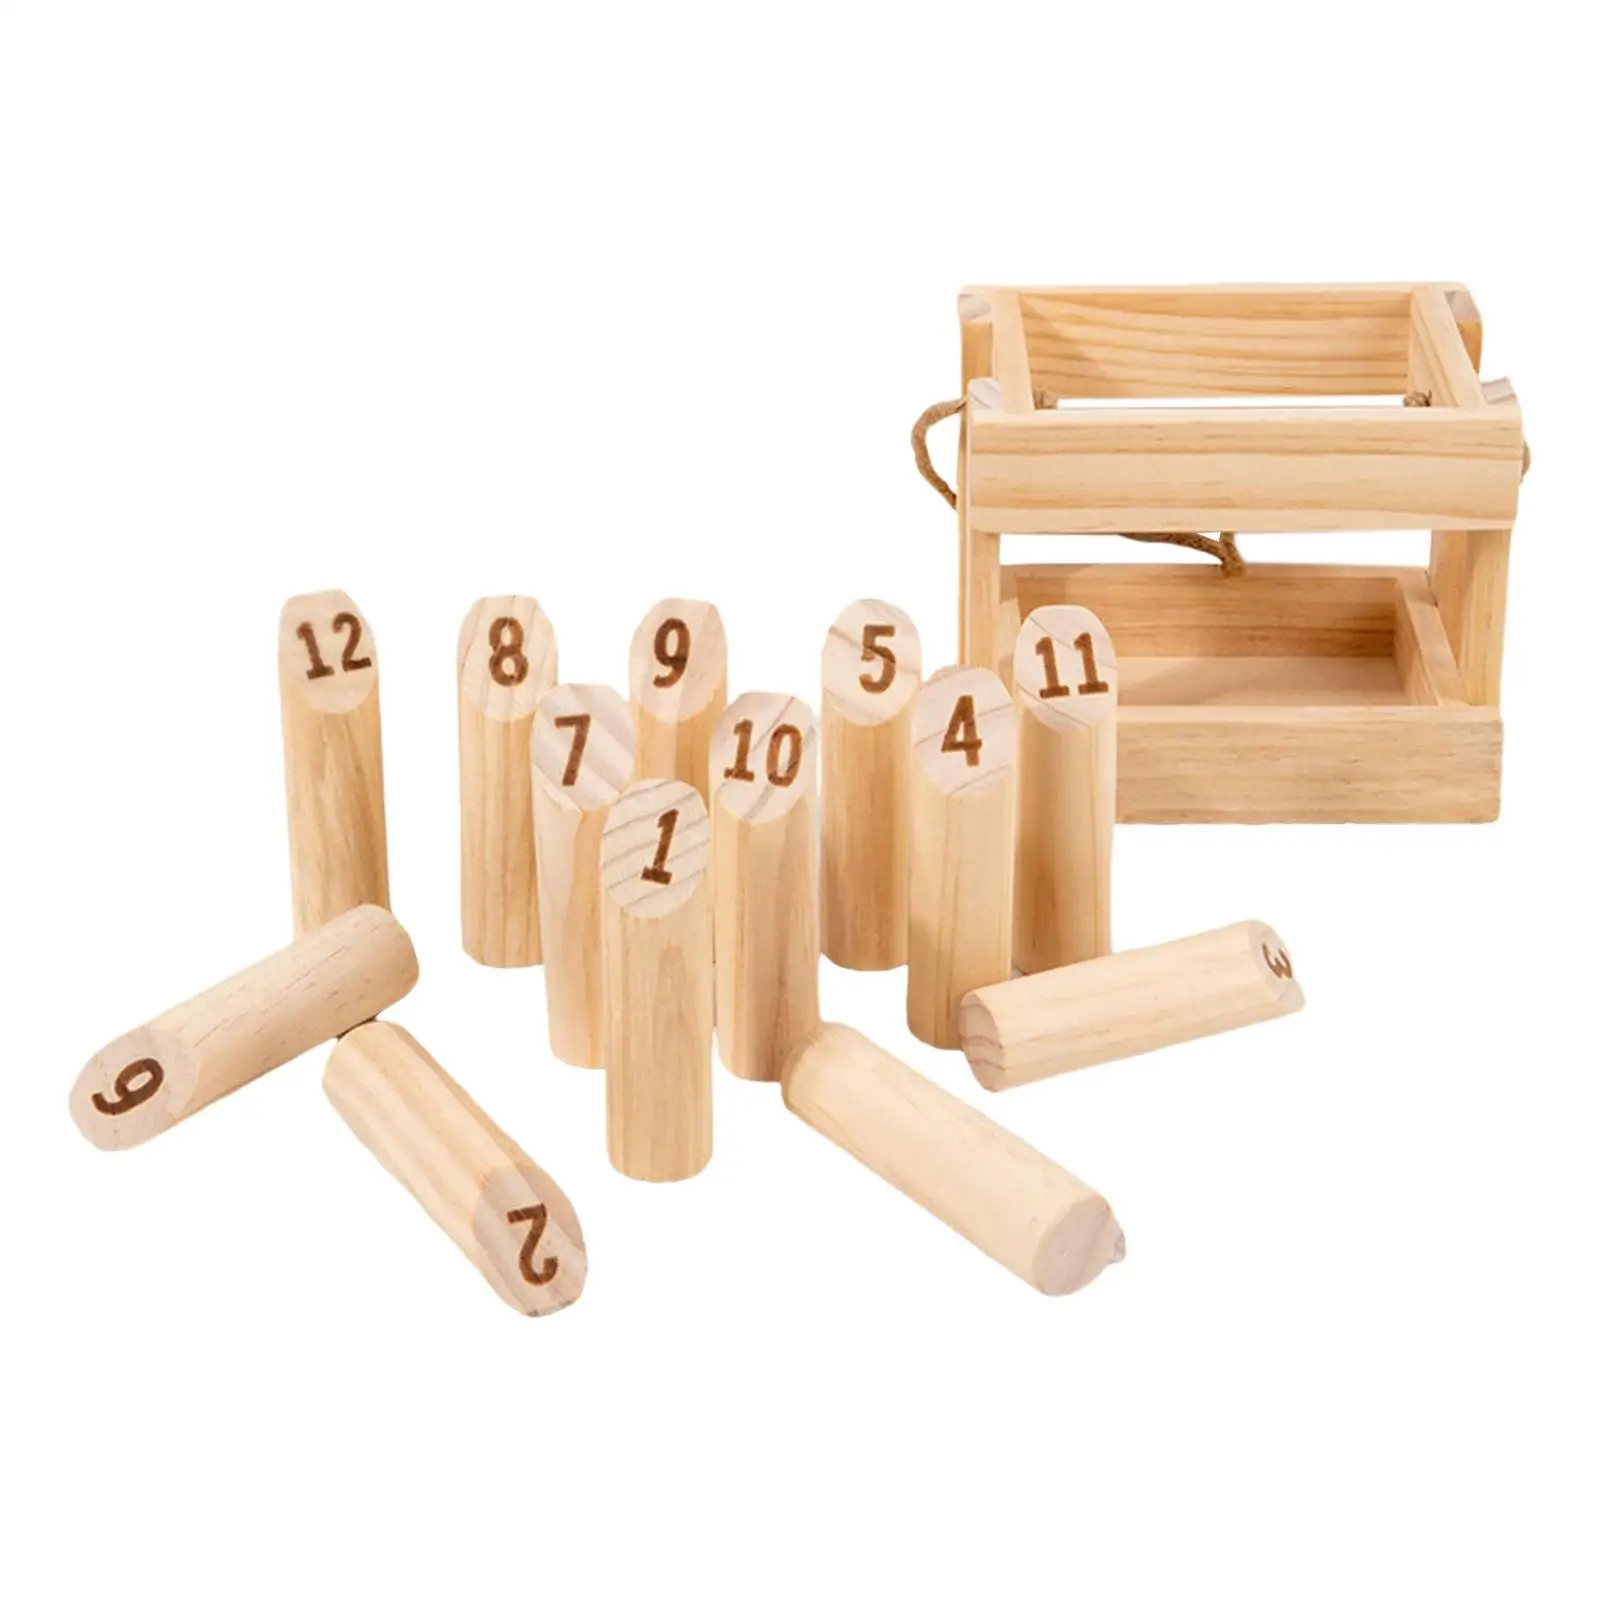  Tossing Game 12 Pcs Numbered Pins Throwing Scatter for Backyard Kids